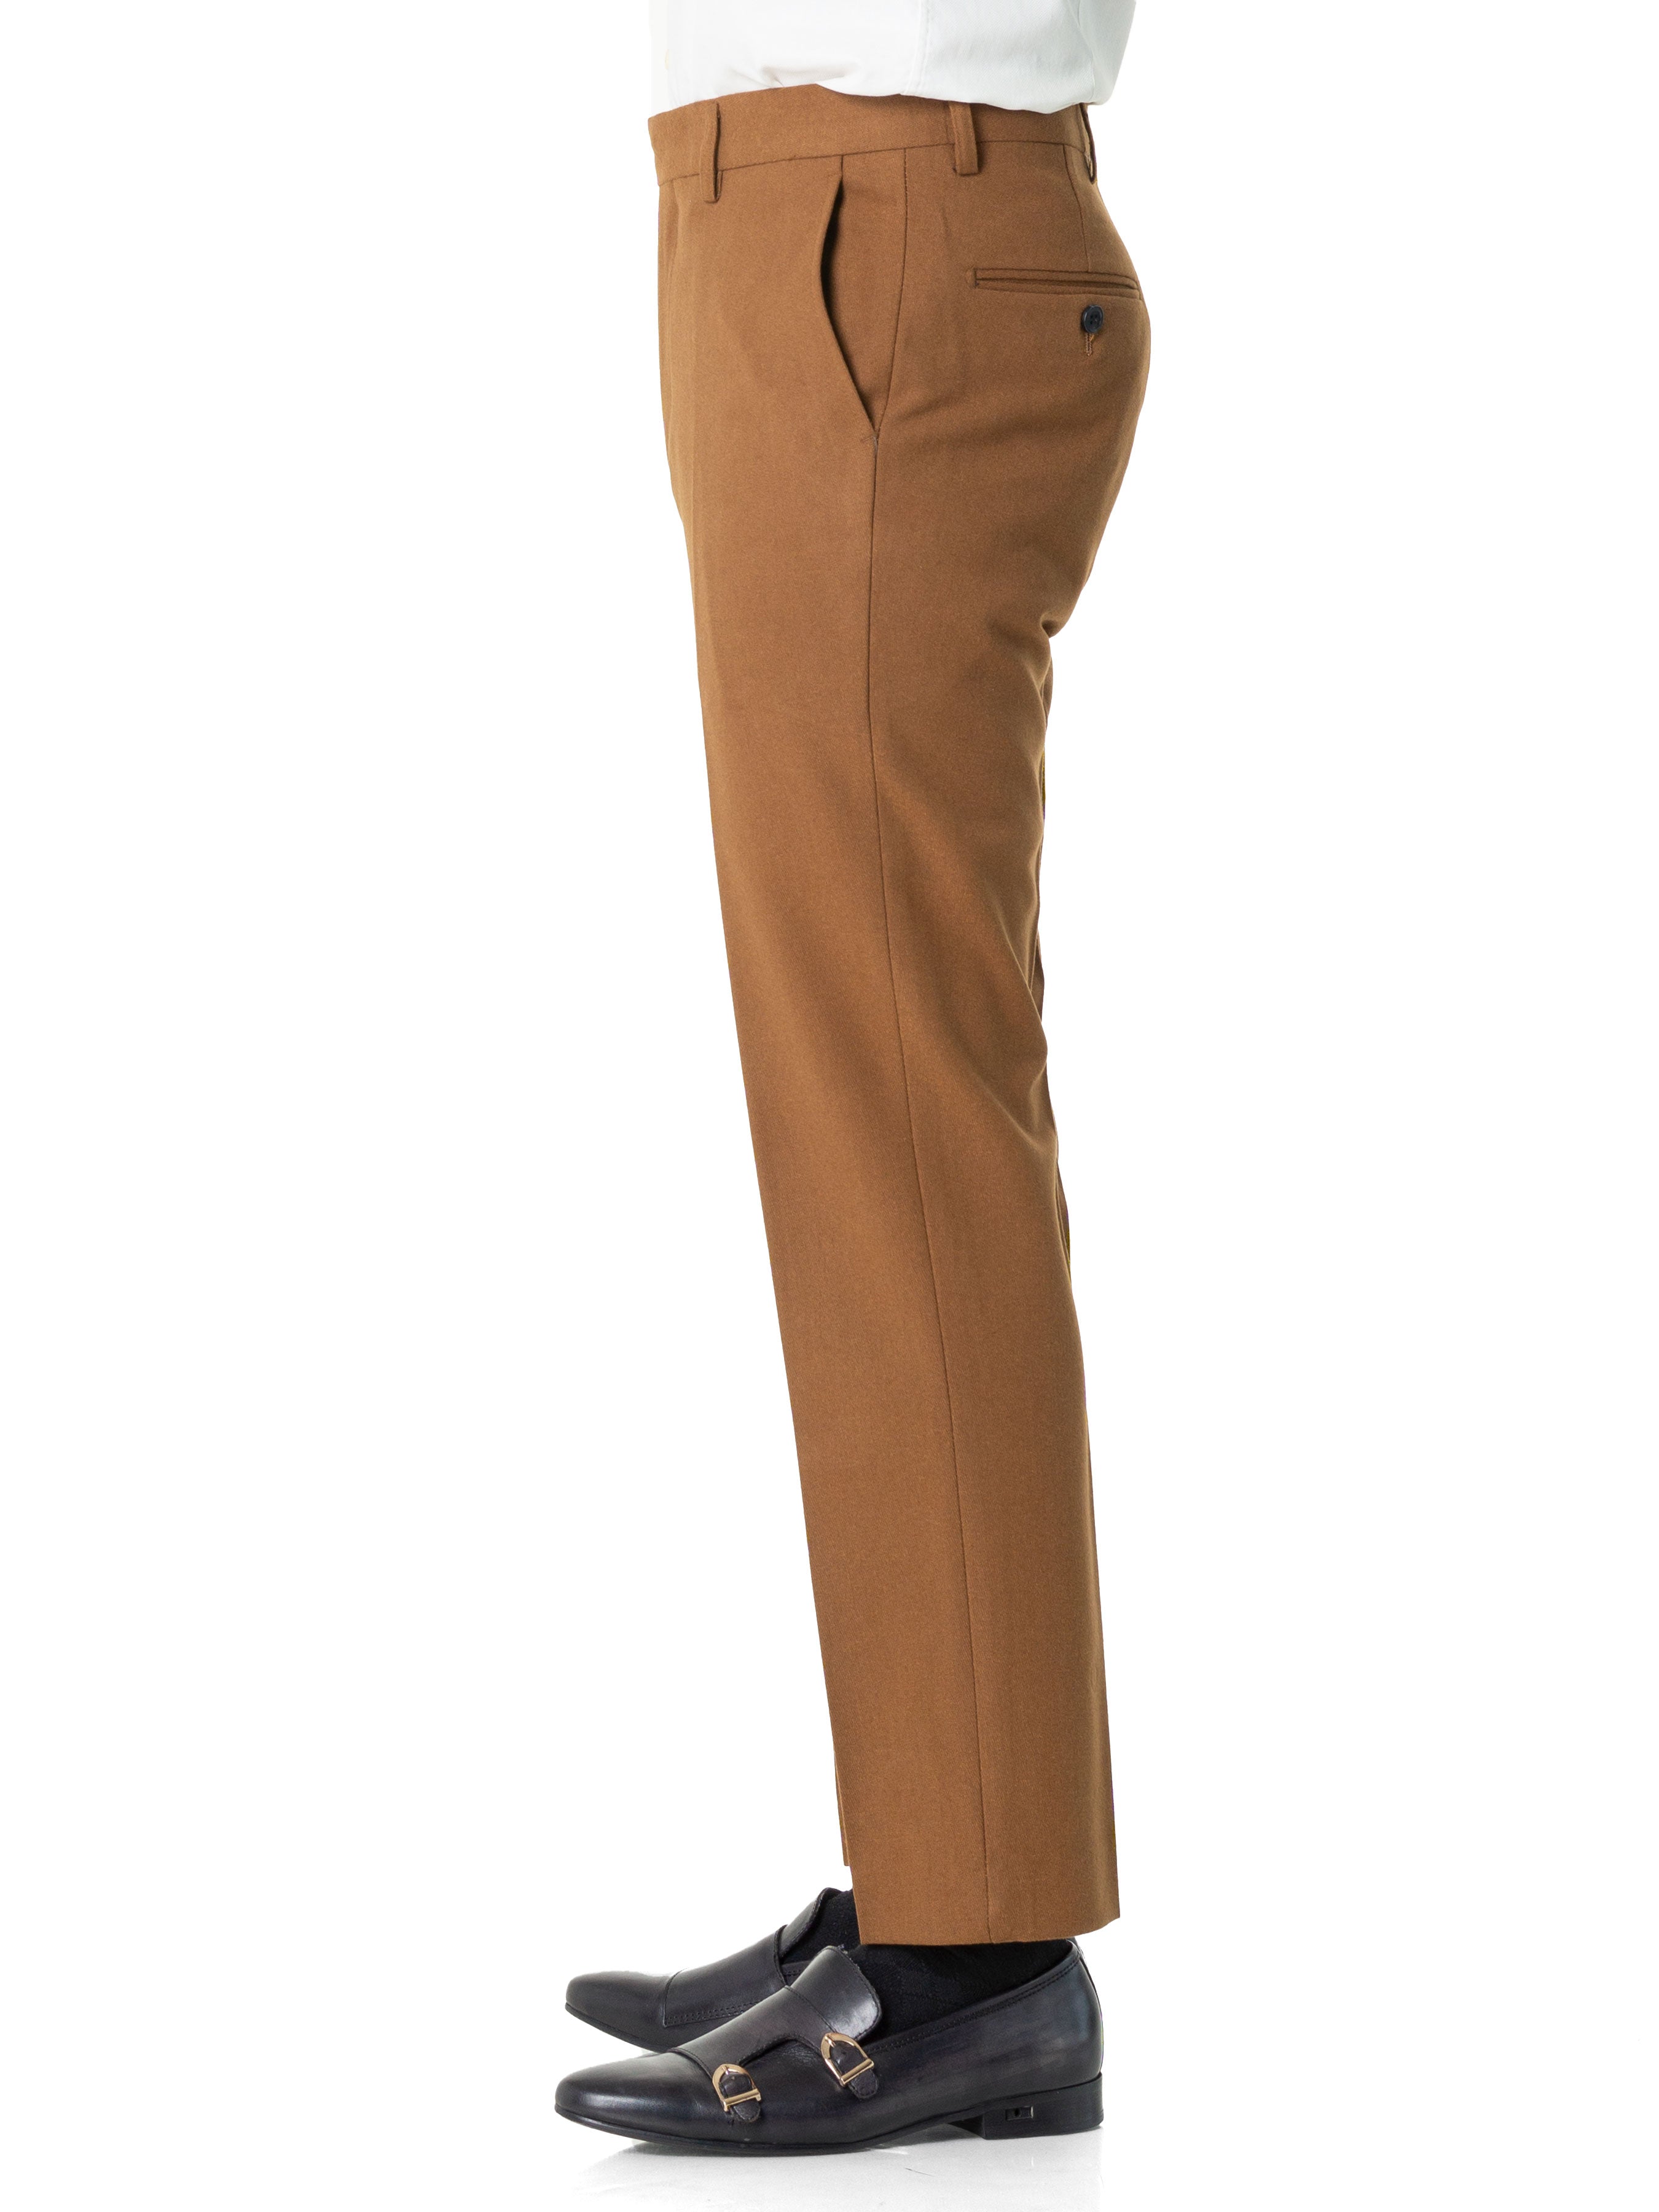 Trousers With Belt Loop - Cinnamon Textured Plain (Stretchable) - Zeve Shoes